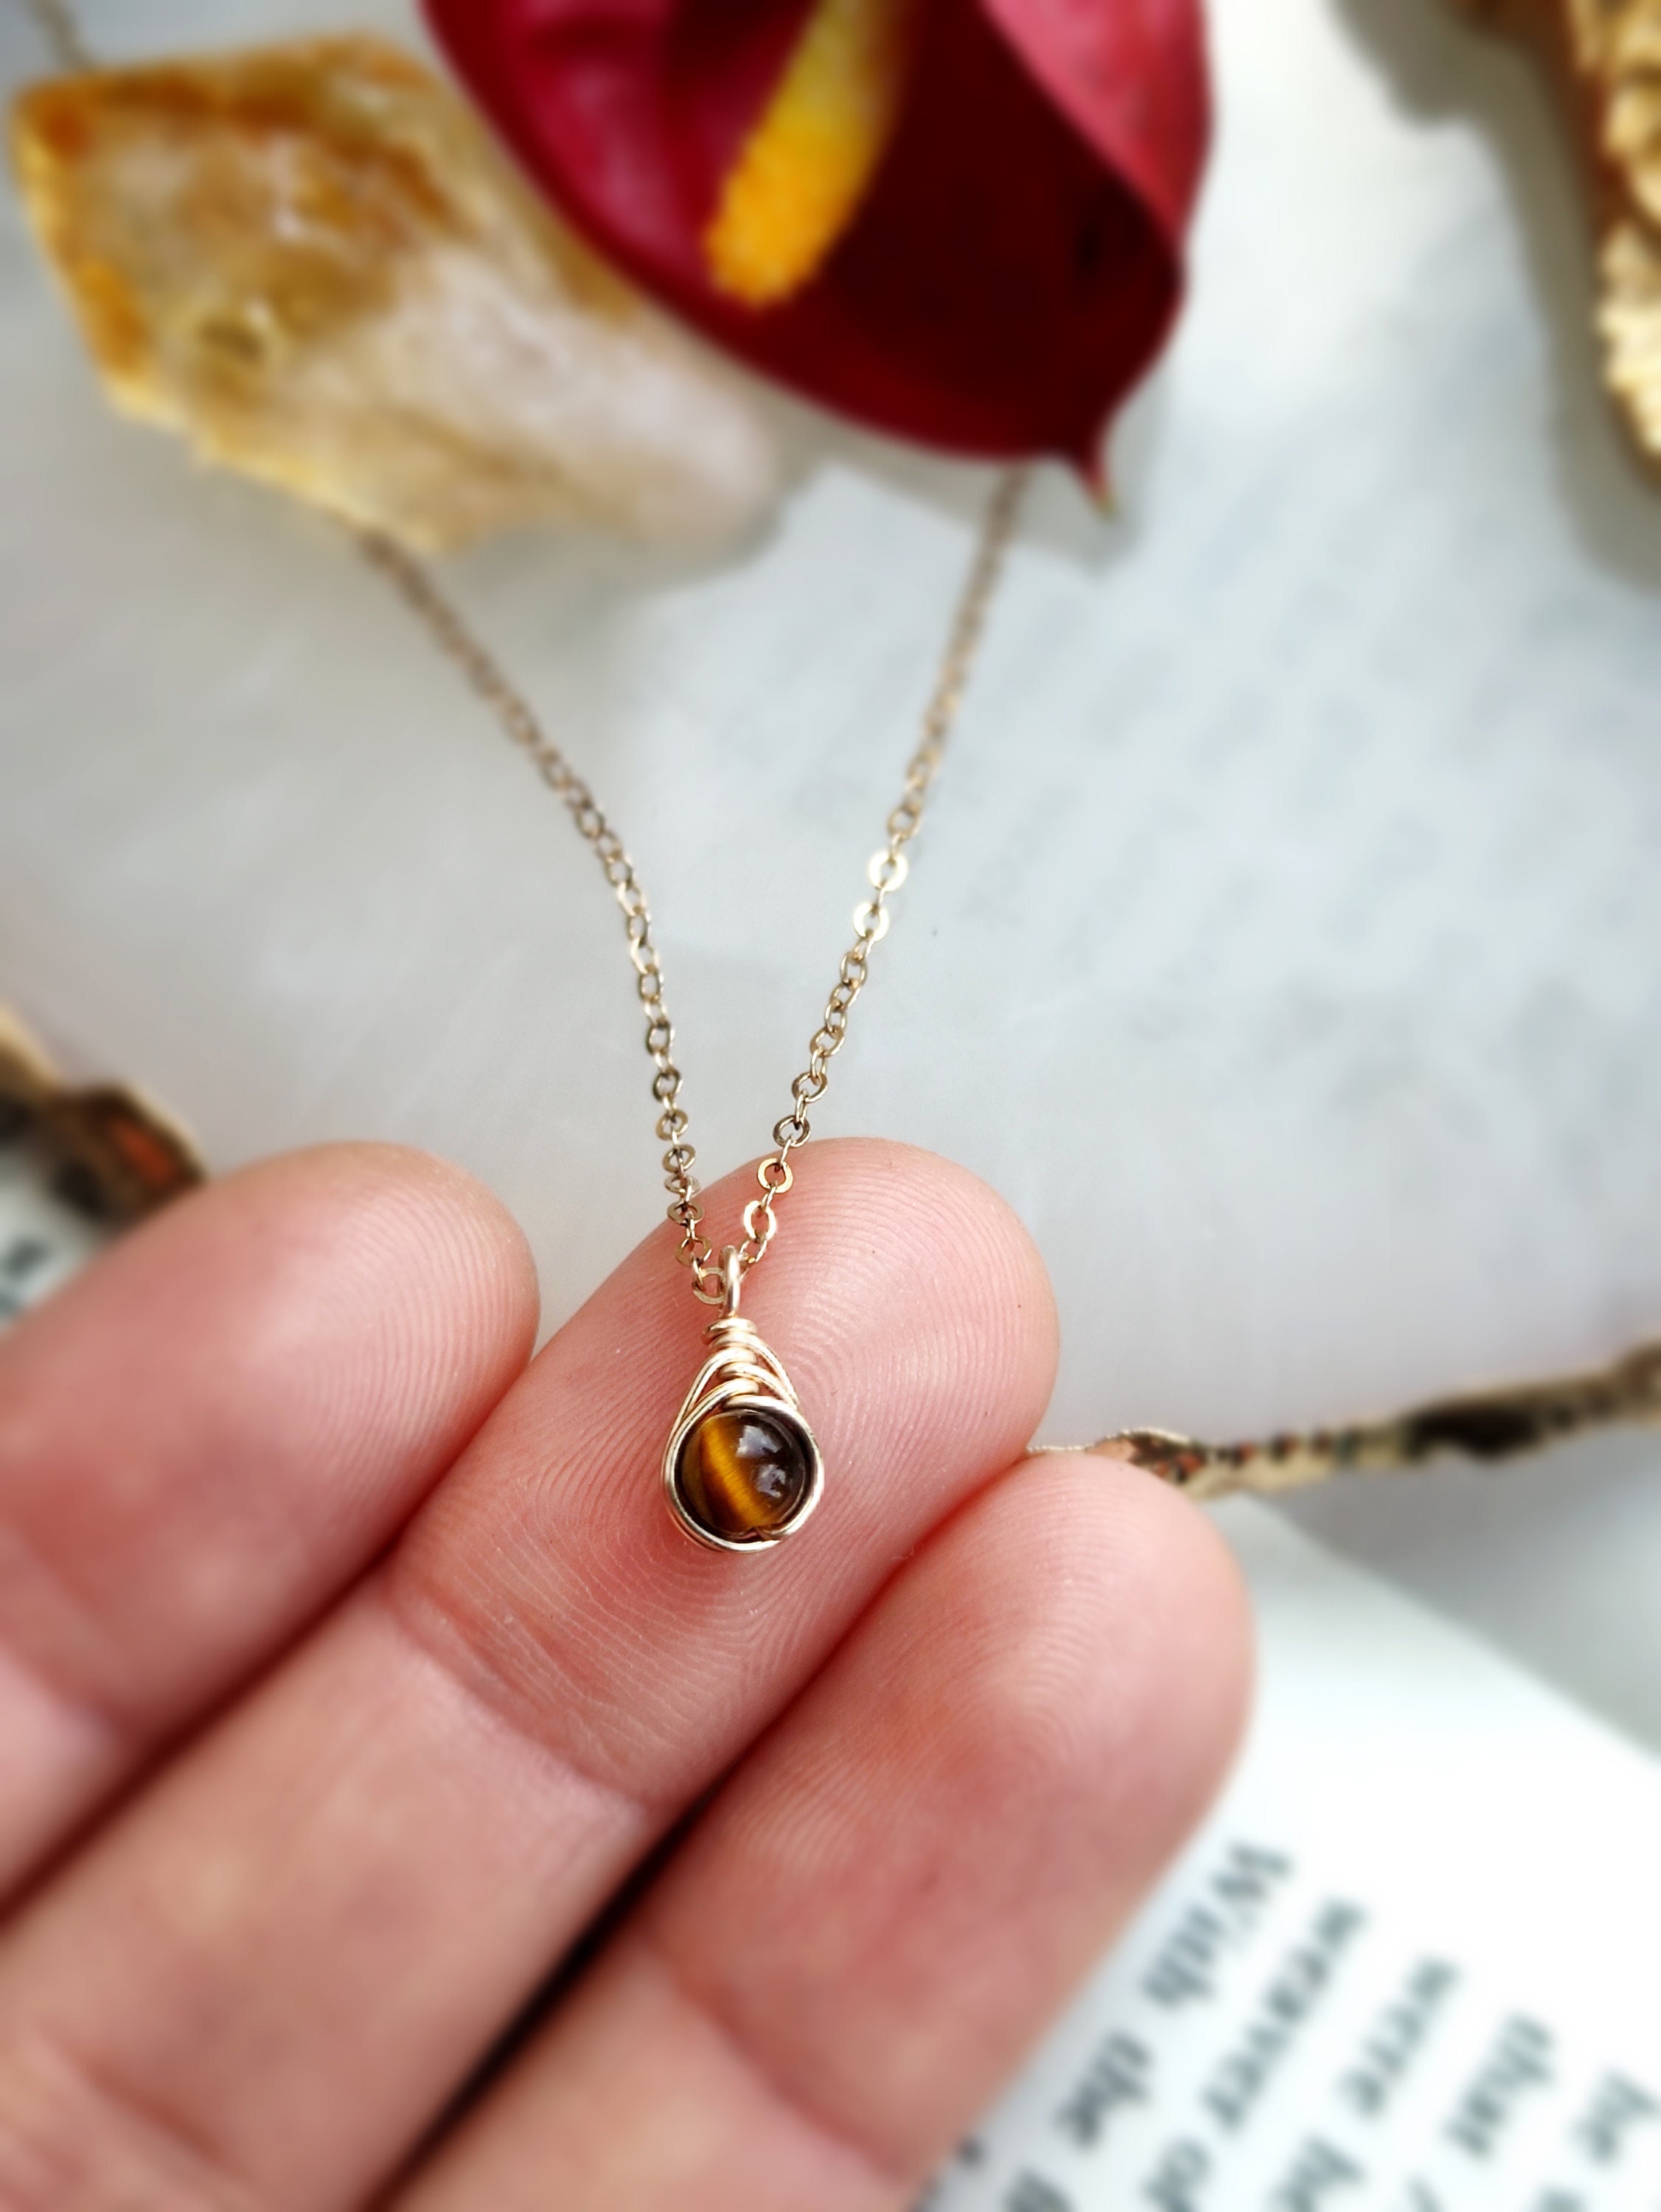 1-Stone Petite Rock Necklace - Judith Bright Designer Jewelry Tiger's Eye / 14K Gold-Filled